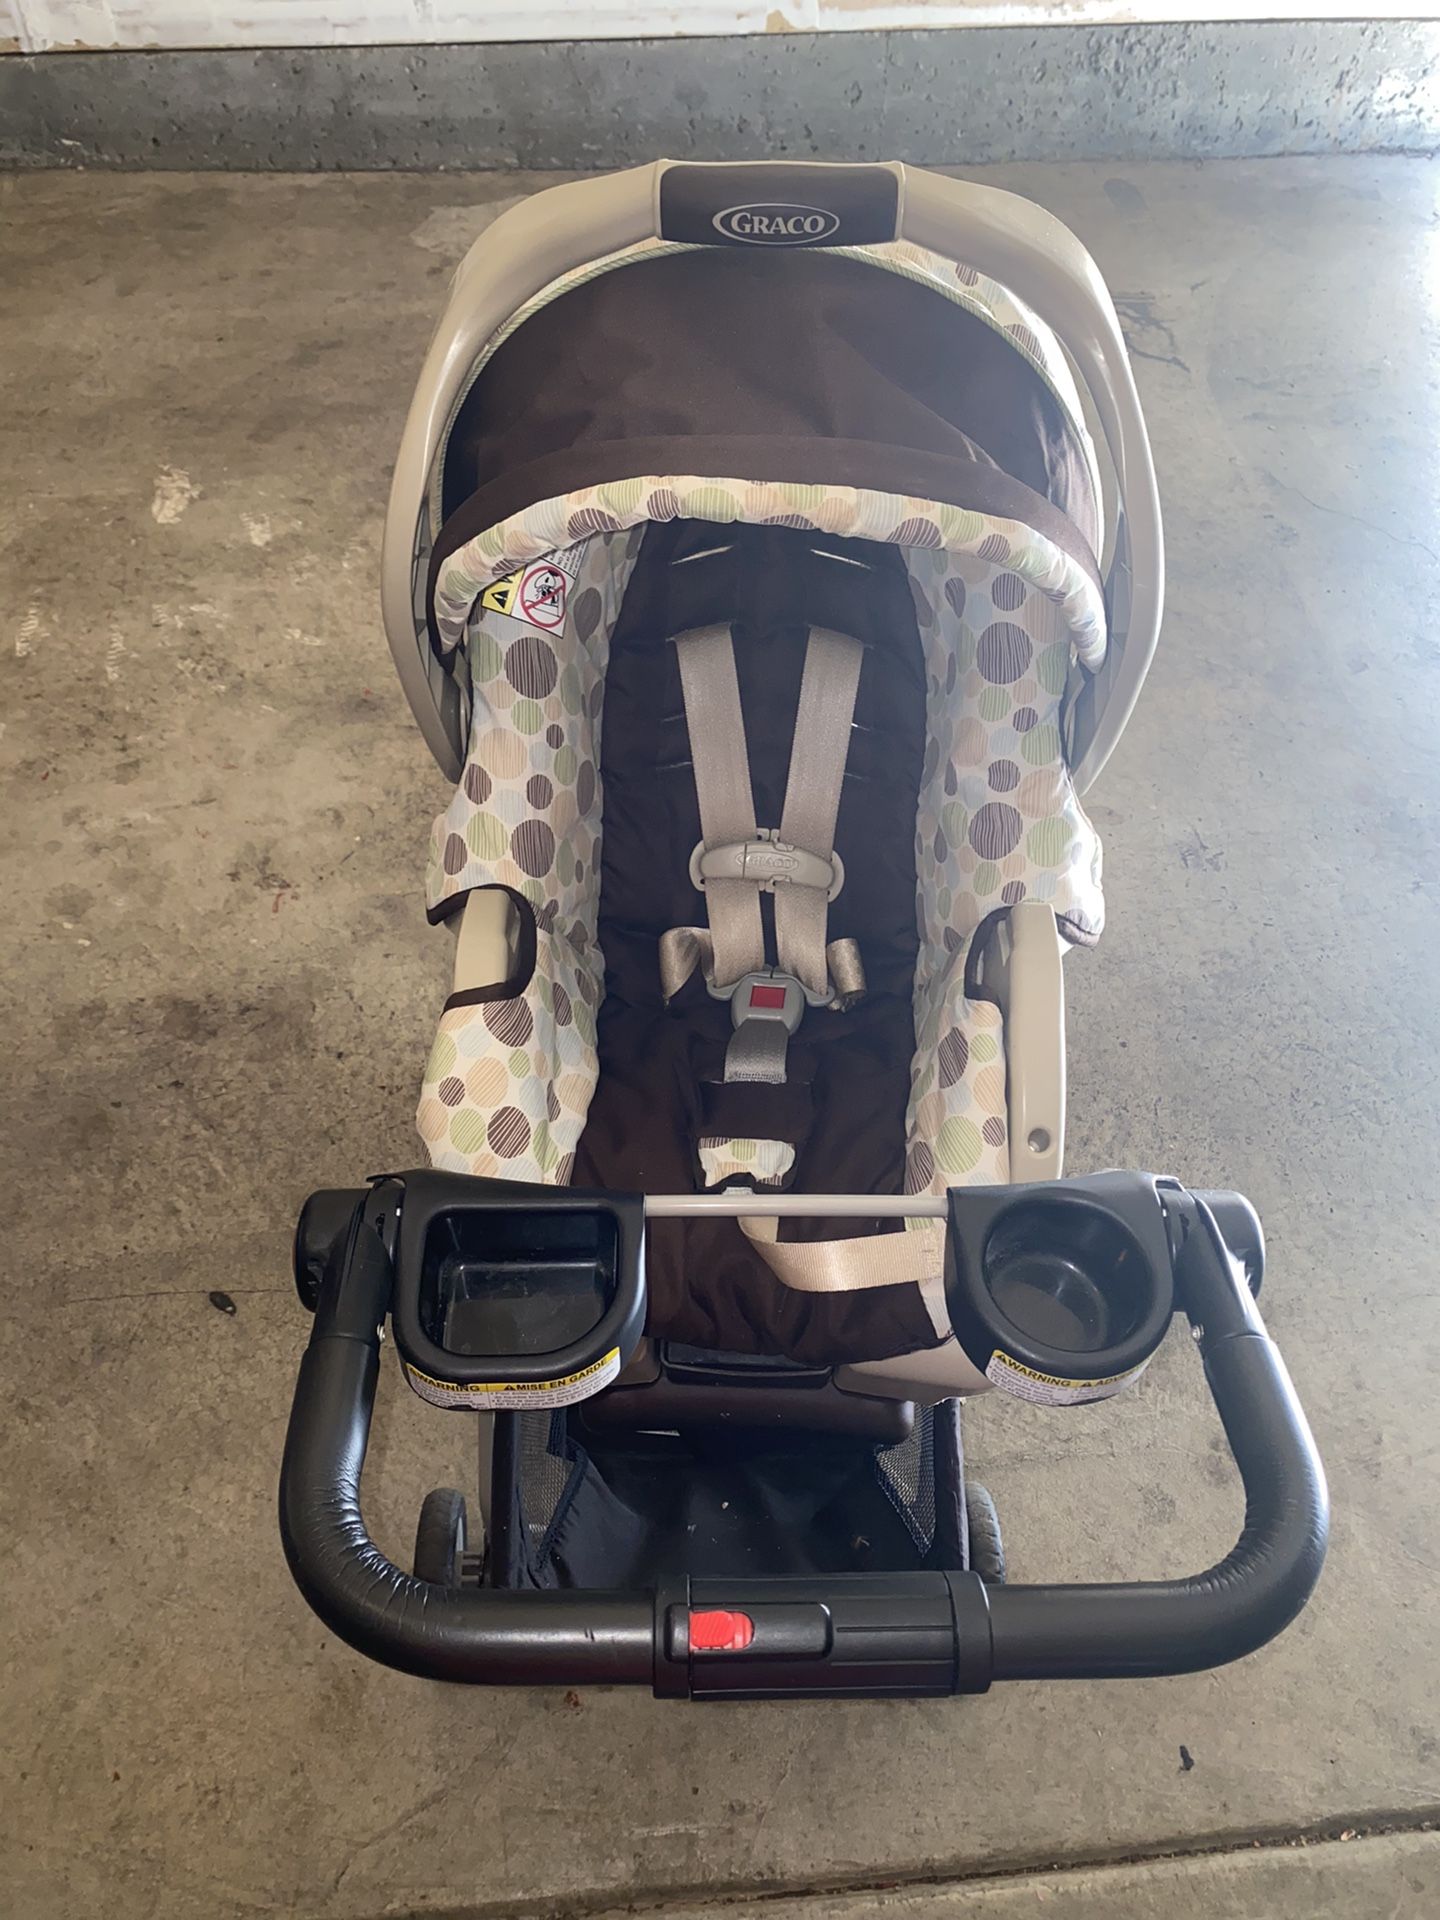 GRACO car seat and stroller